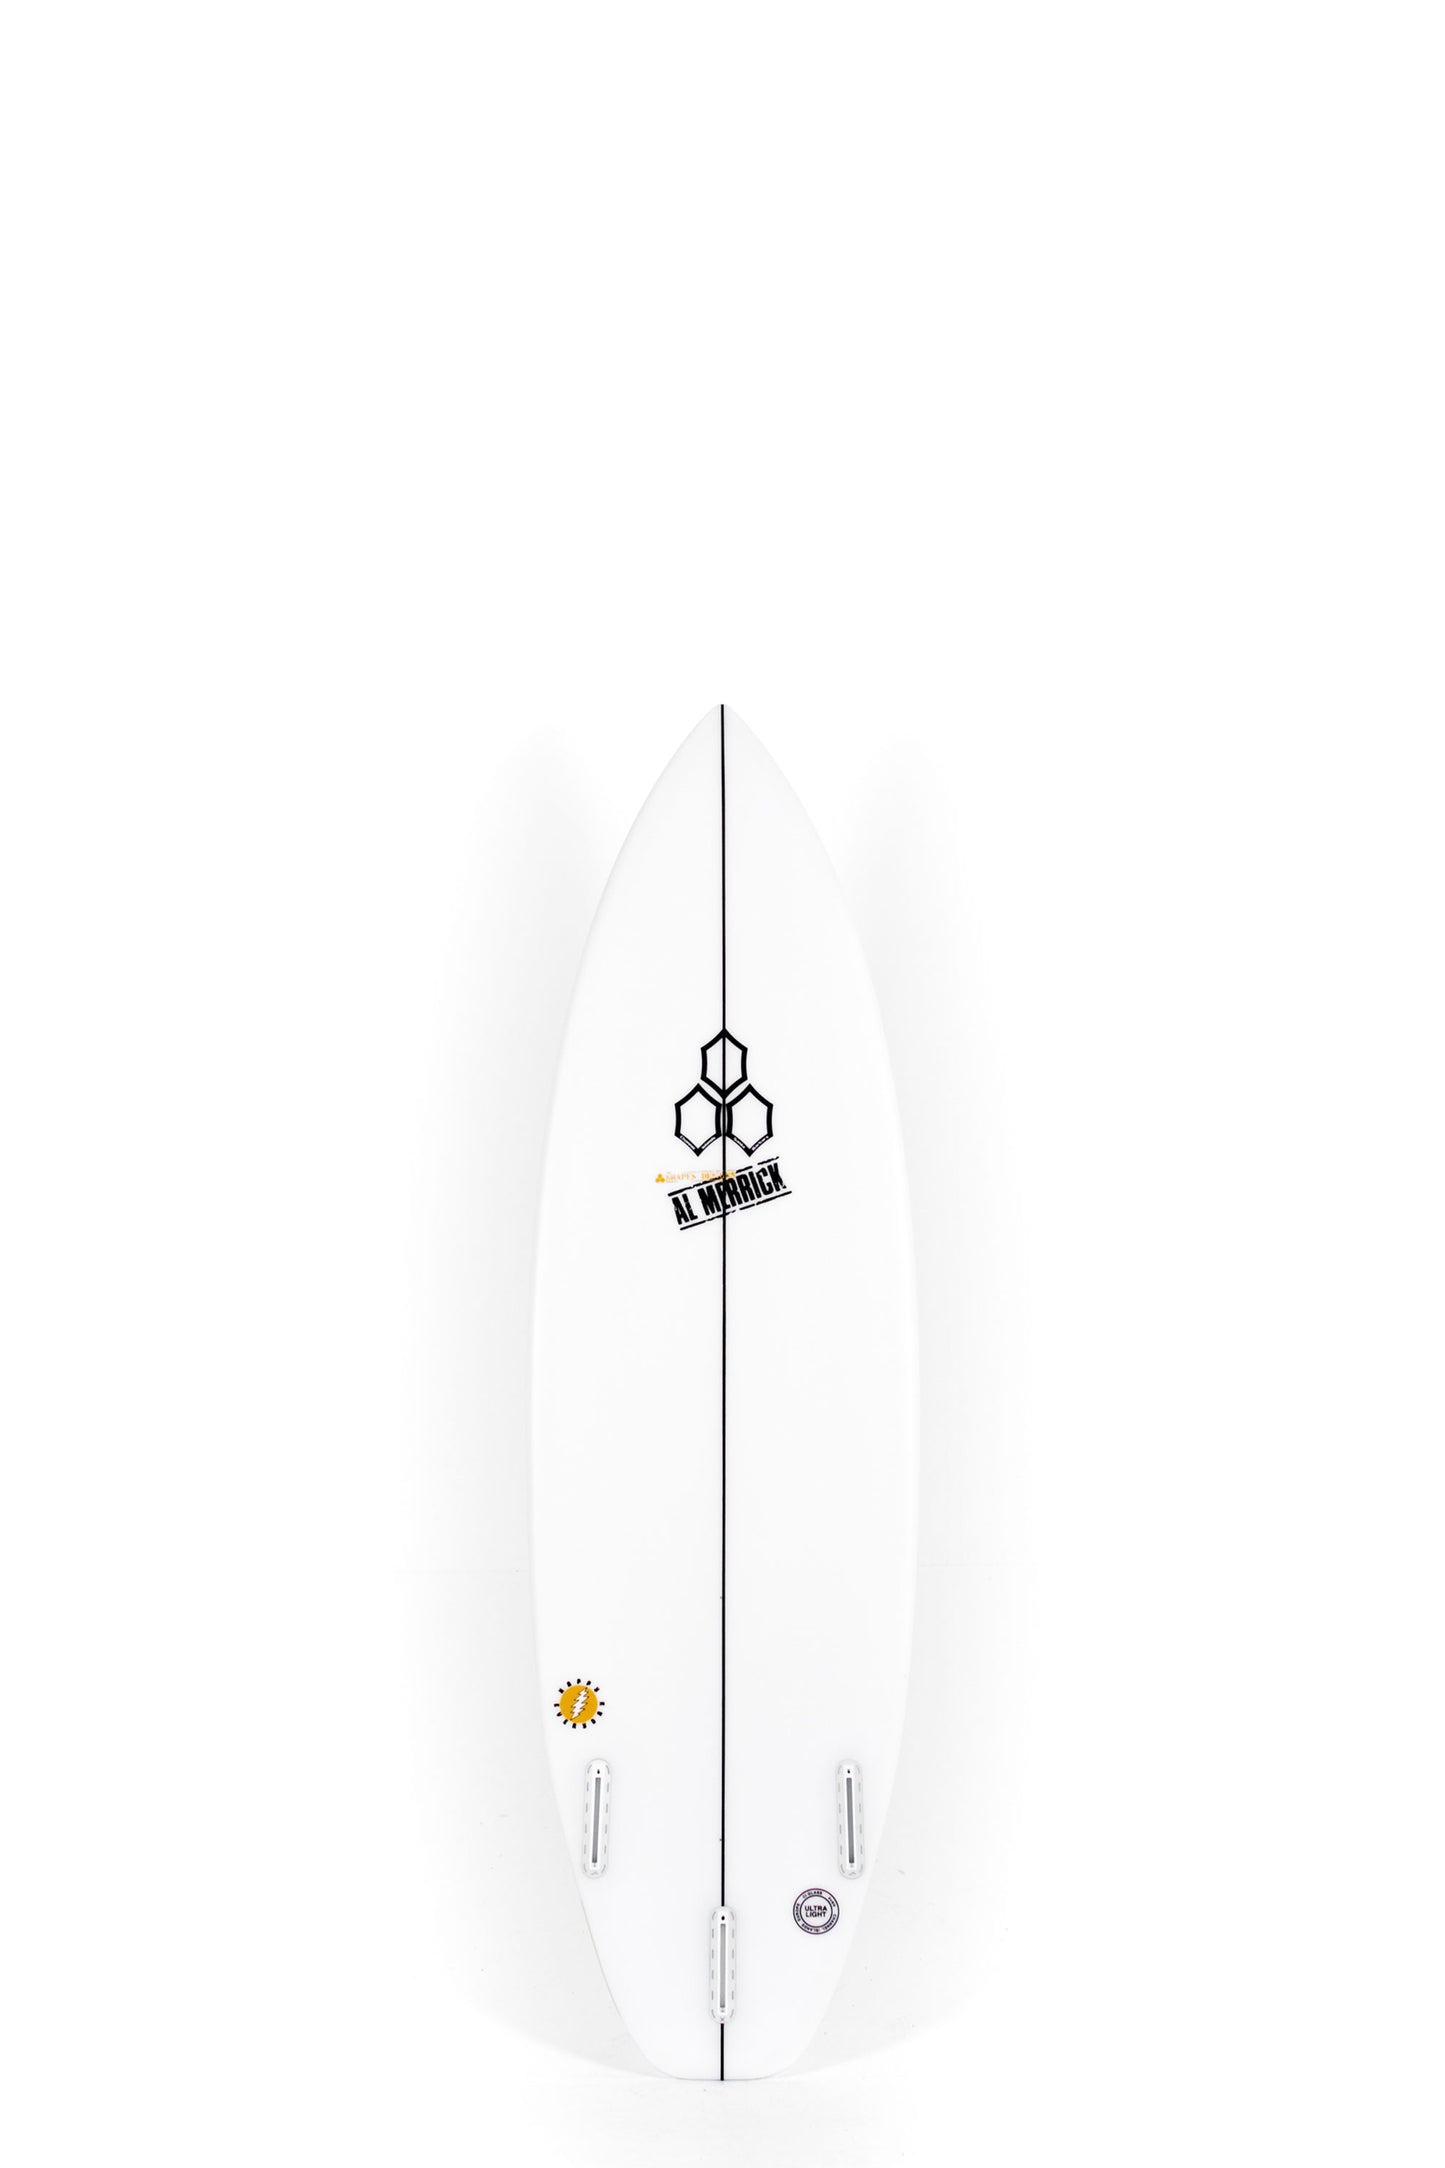 Channel Islands Surfboards | HAPPY EVERYDAY - shop at PUKAS SURF SHOP